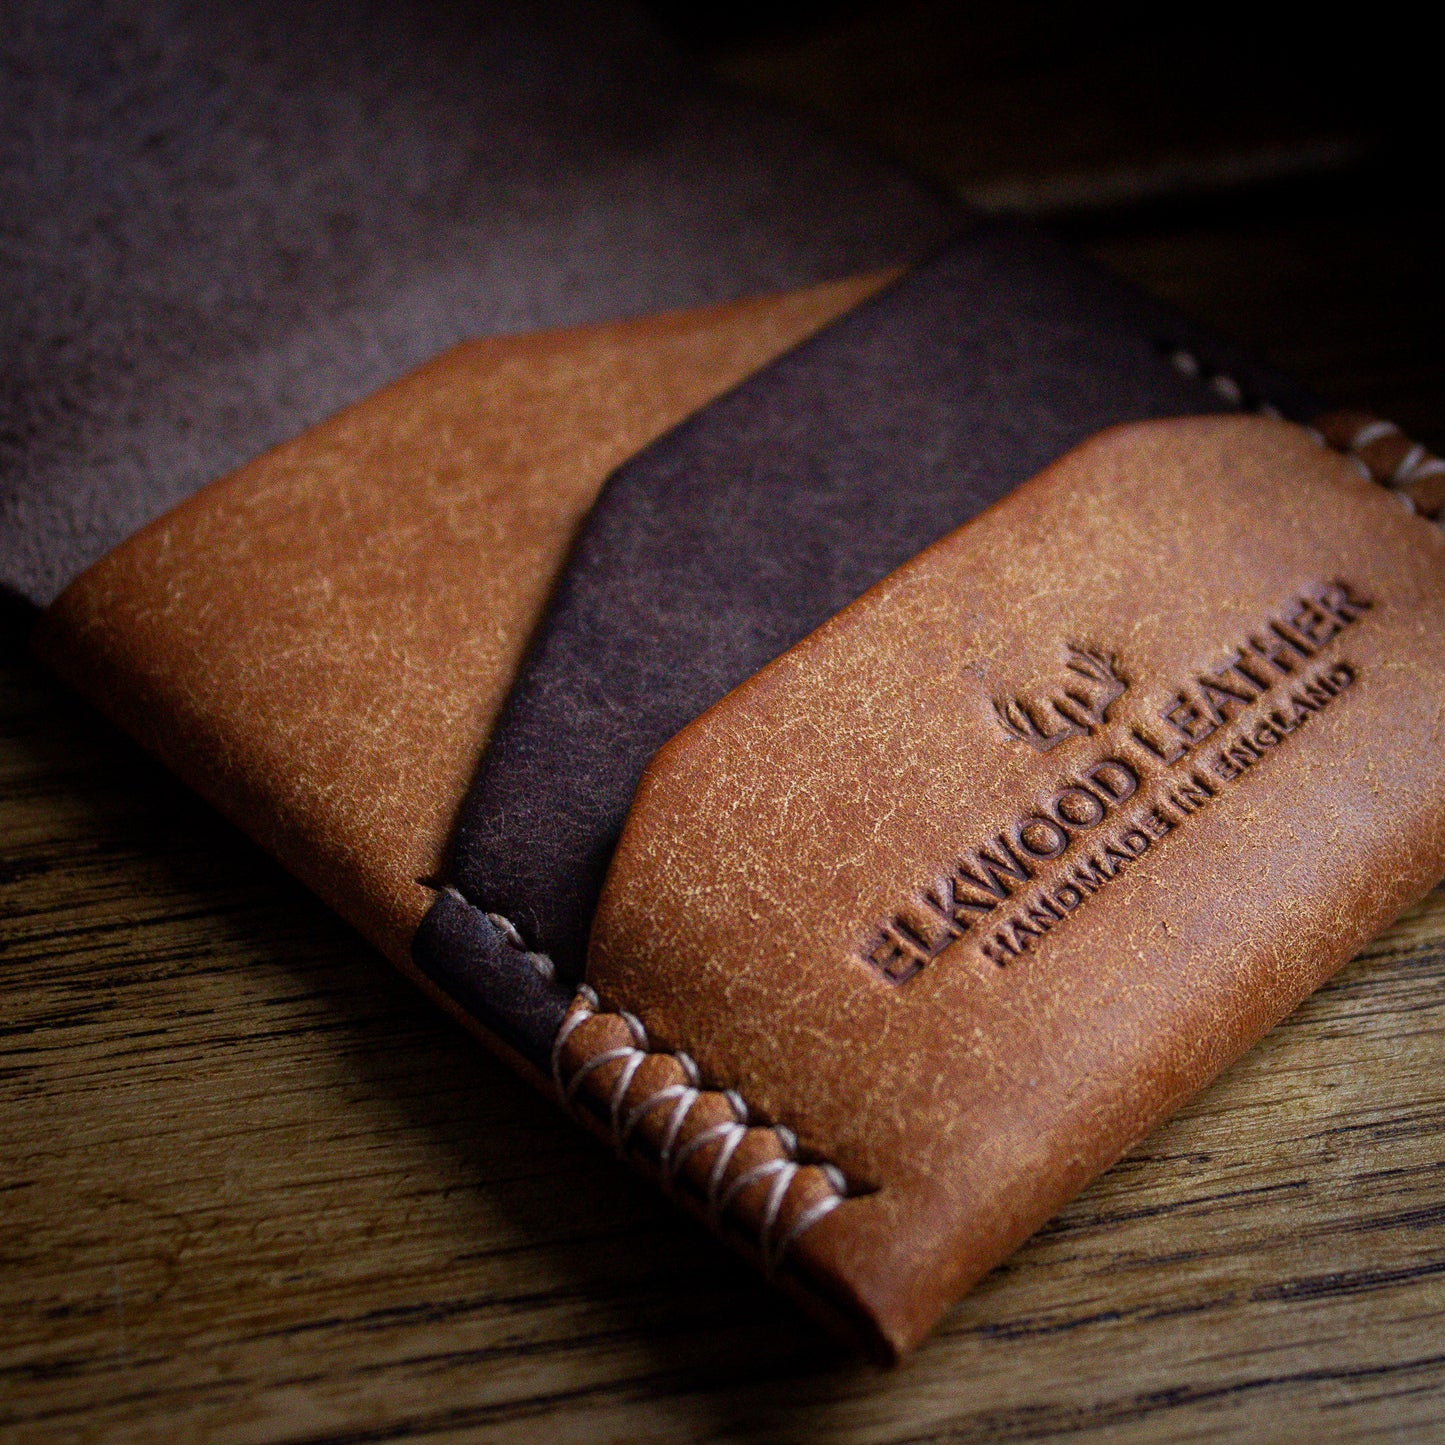 Elkwood Leather - The Blackthorn - EDC Flap full grain Italian Pueblo leather cardholder wallet open close up of pockets on wooden table next to brown leather baseball